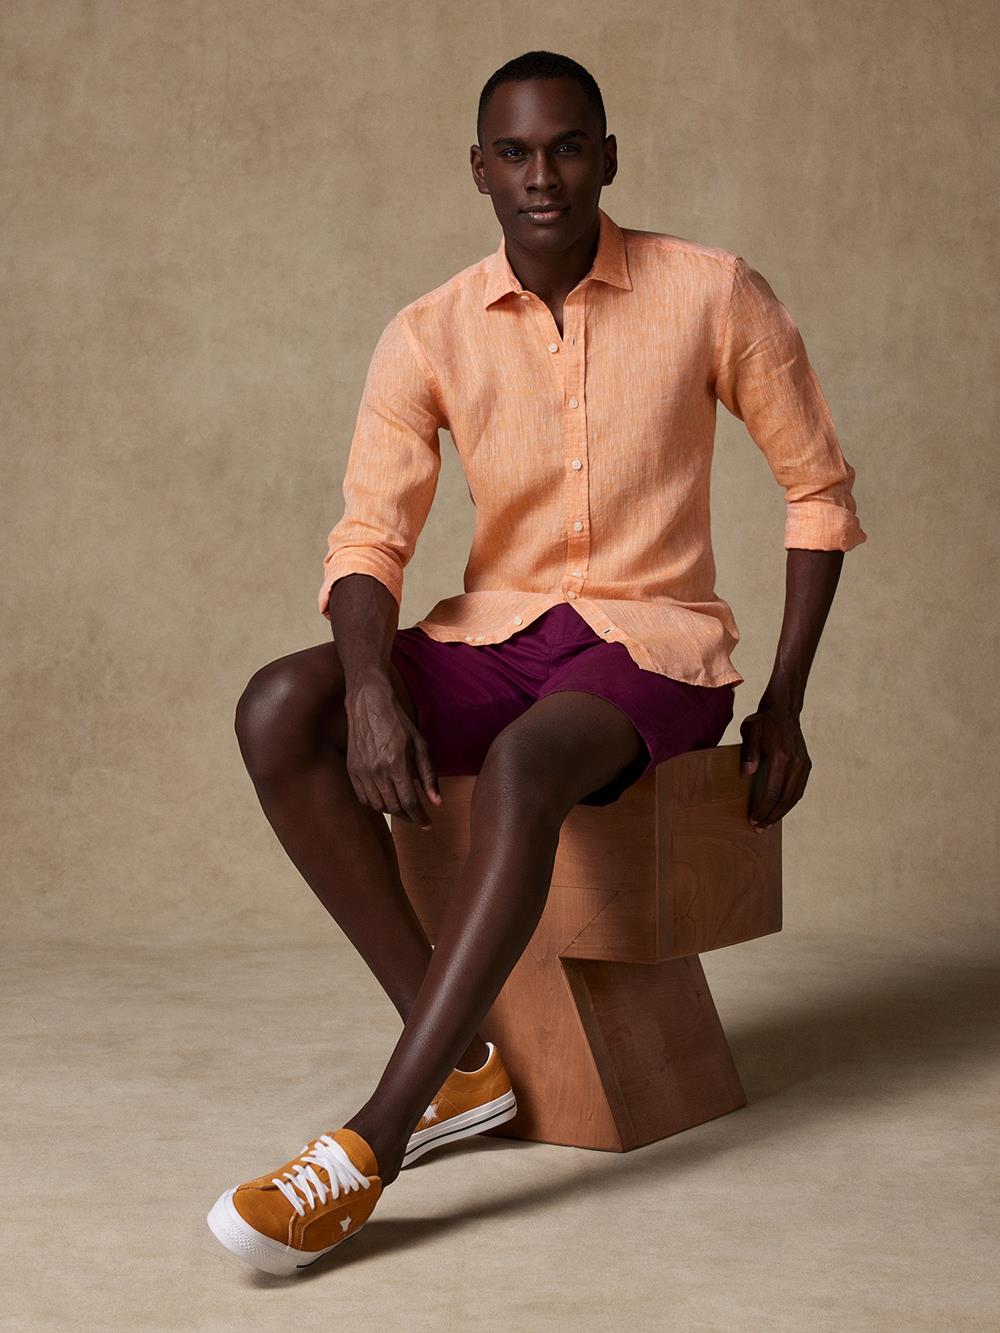 Cody slim fit shirt in apricot linen